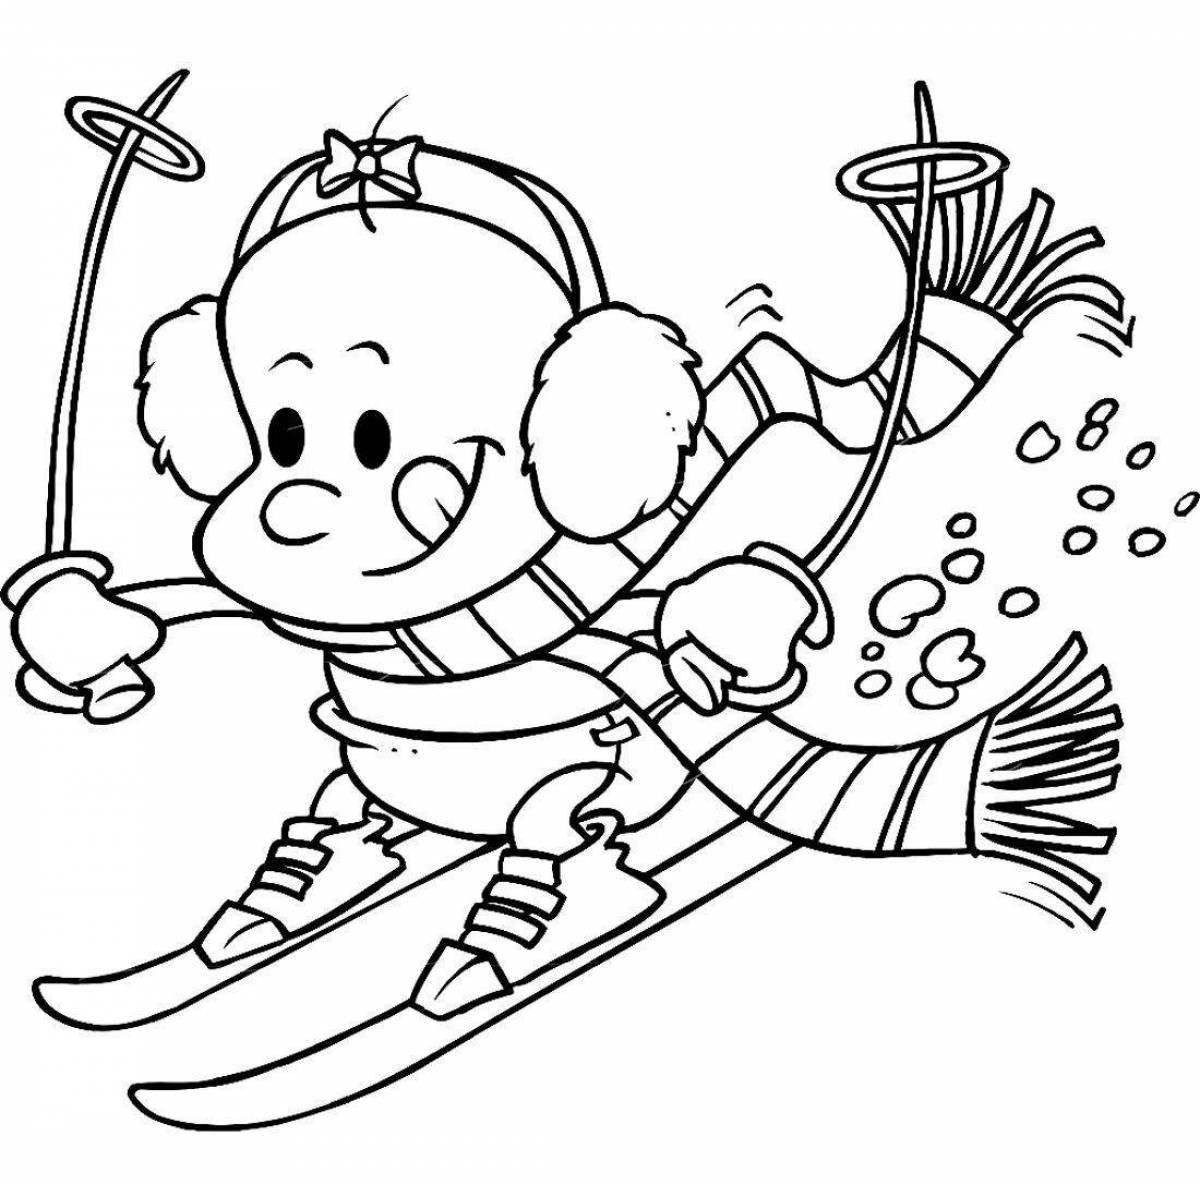 Colorful skier coloring book for children 6-7 years old